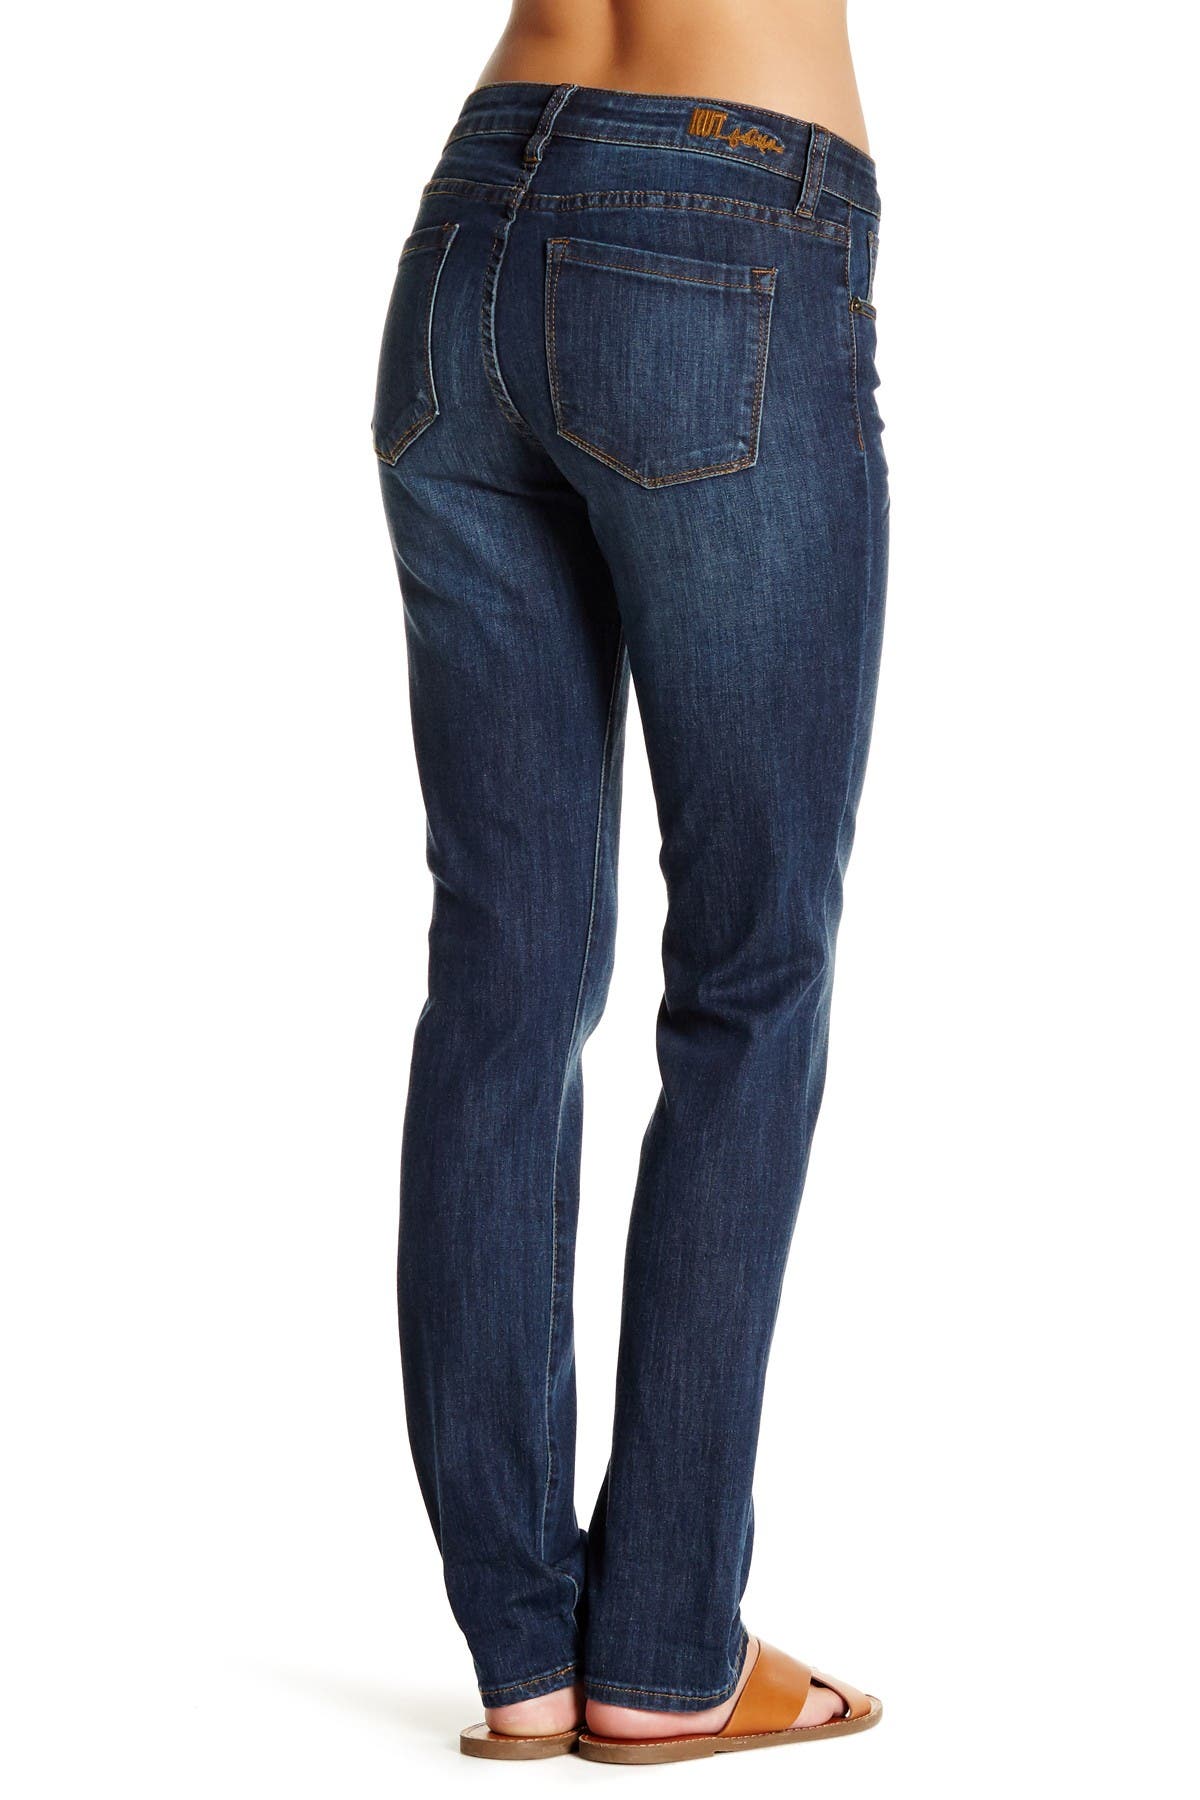 kut from the kloth tall jeans